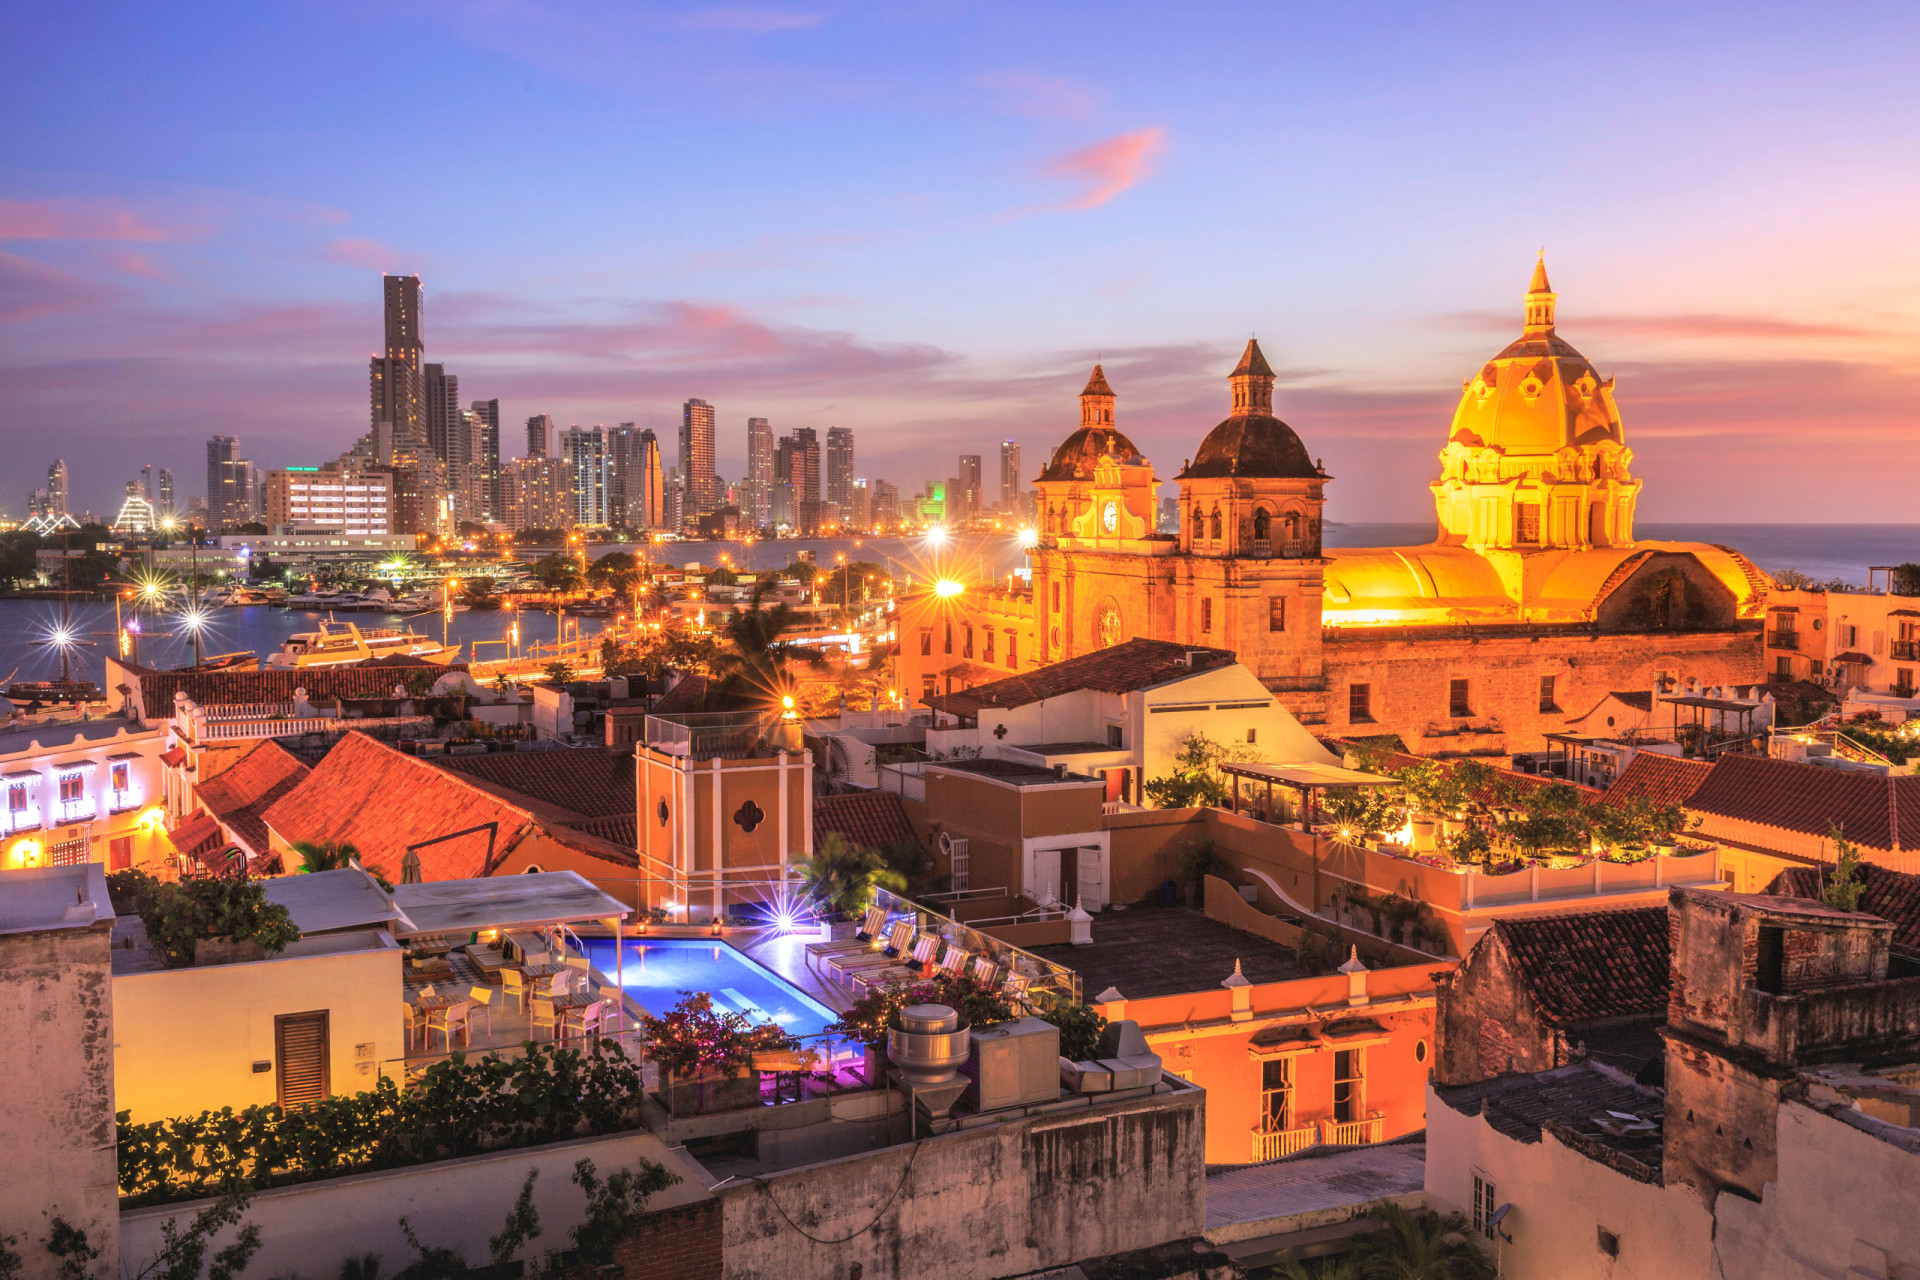 <p>Equally rewarding is the UNESCO World Heritage Site of Cartagena. Located on Colombia's Caribbean coast, must-see tourist attractions include the late 16th-century church and cloister of San Pedro Claver and the eerie Palace of the Inquisition.</p>